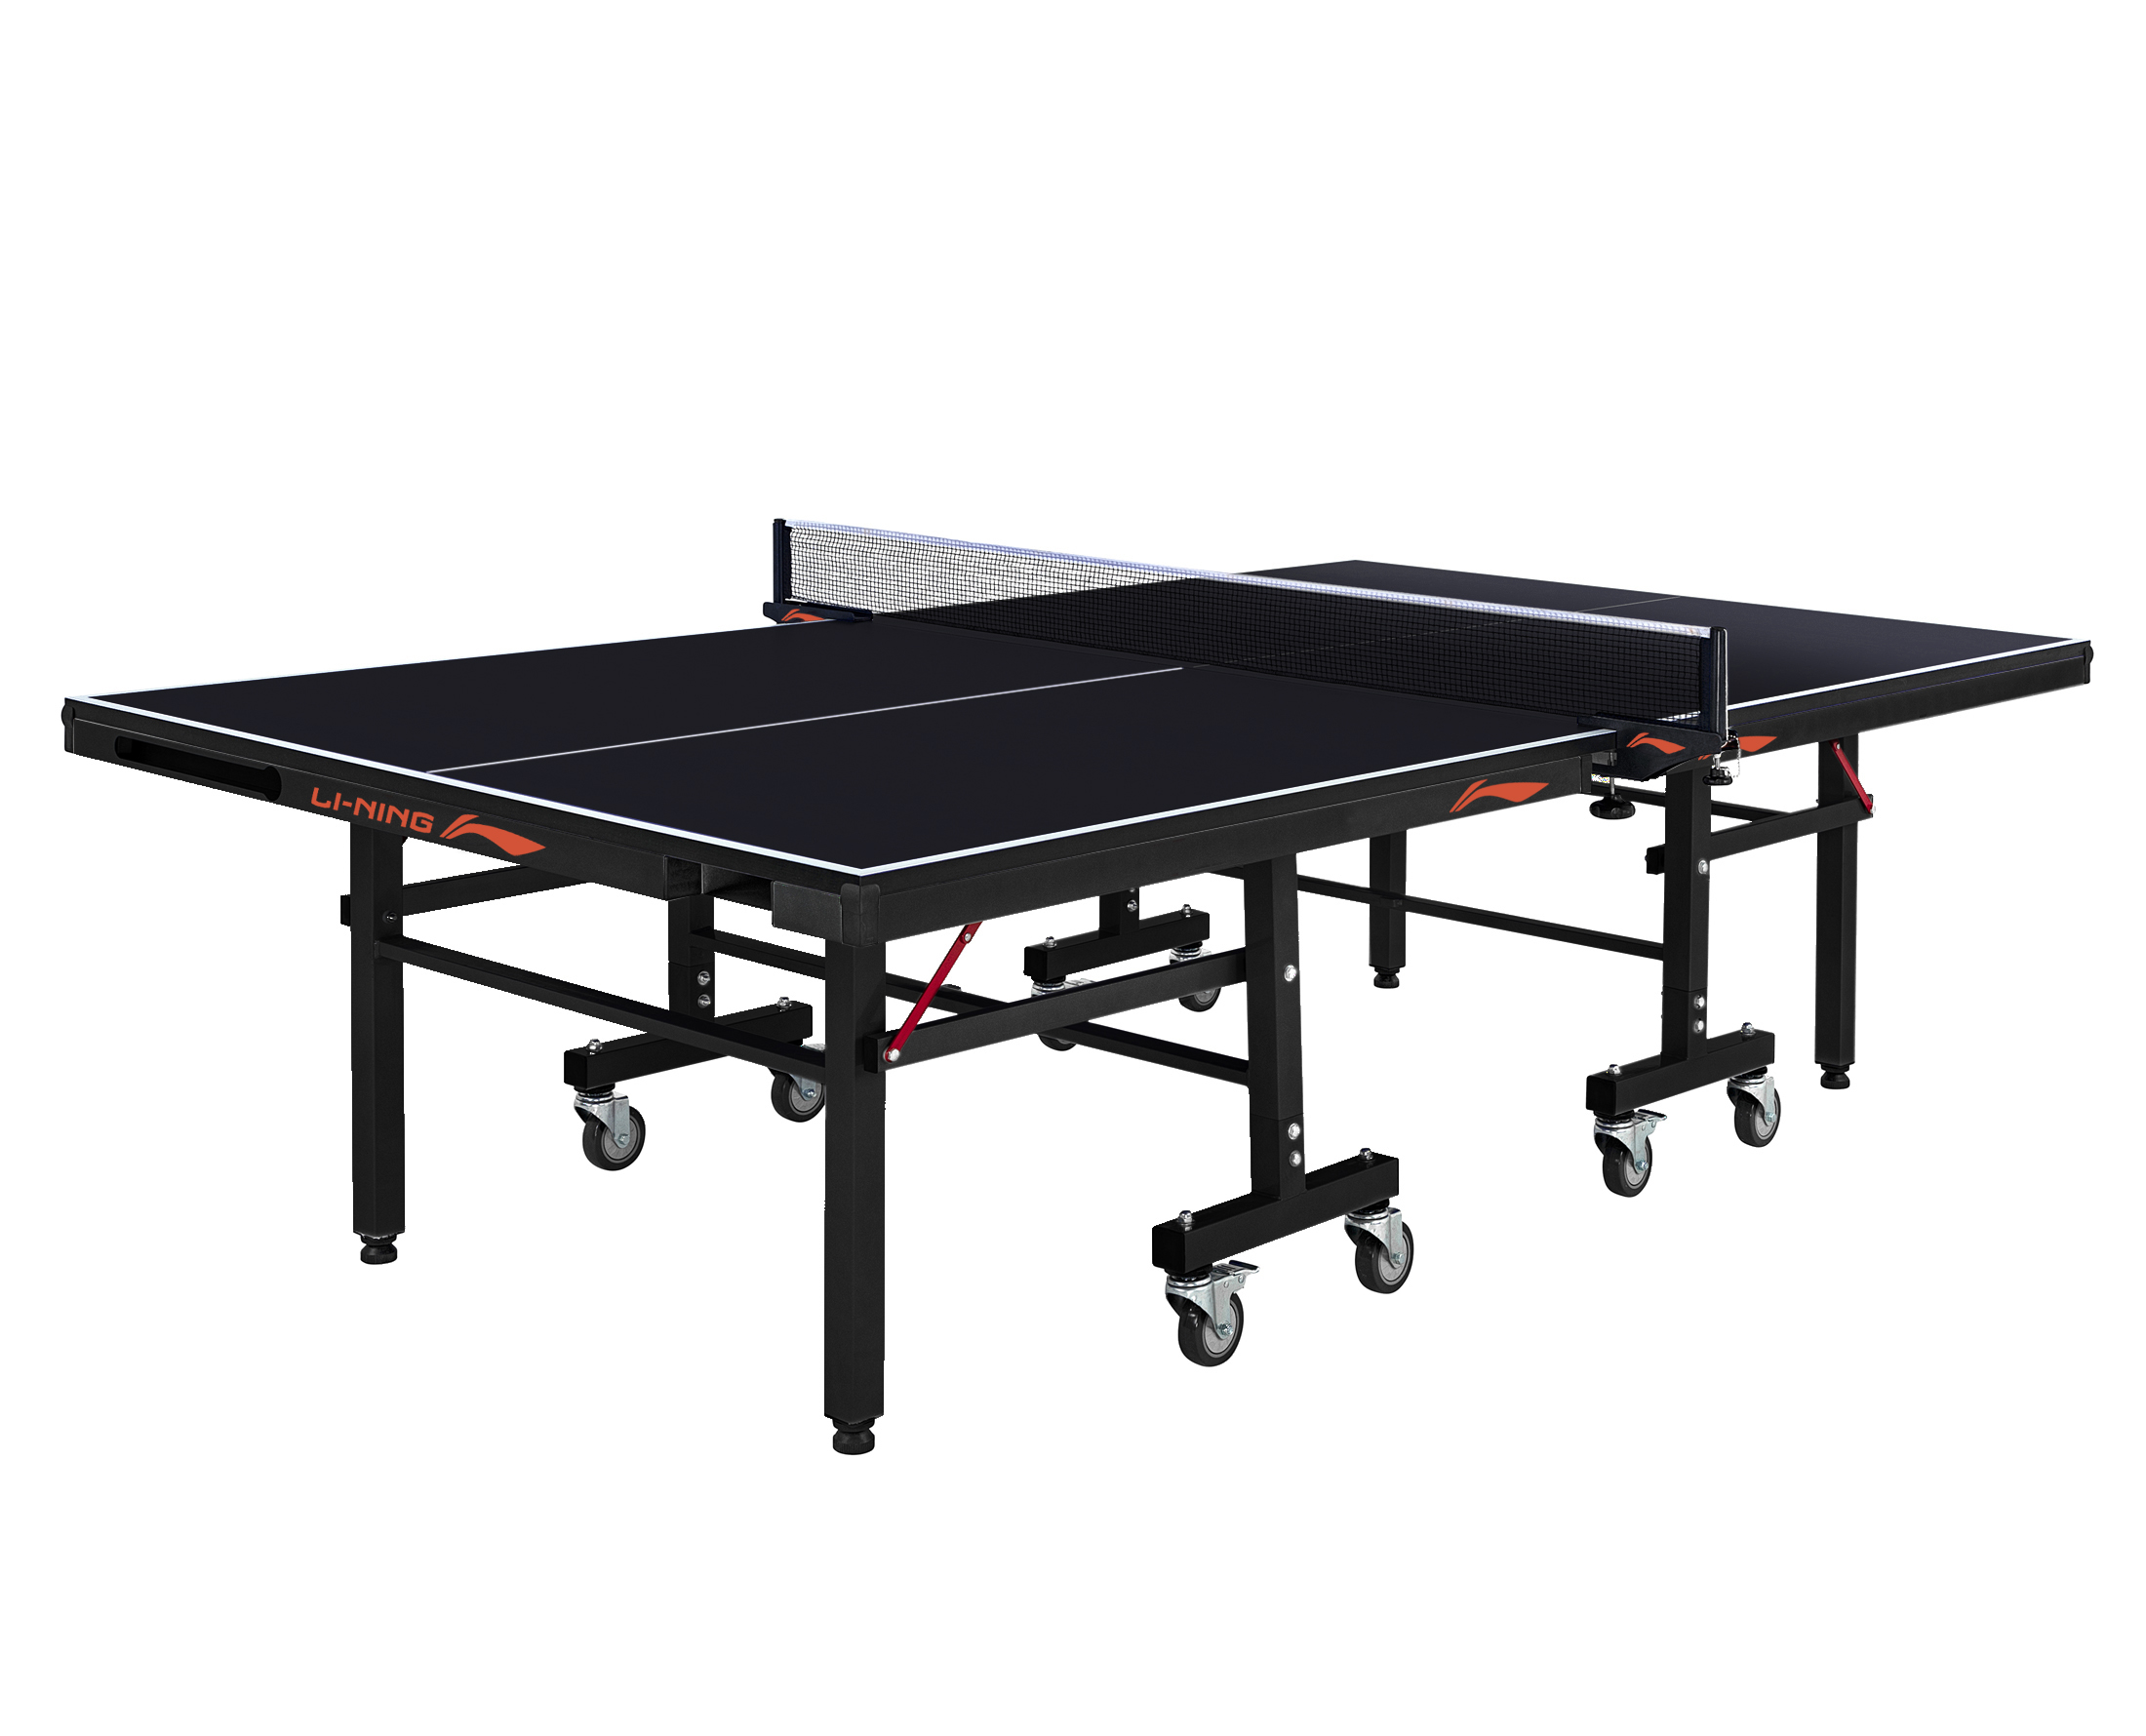 PING PONG TABLE DEMAND SURGES